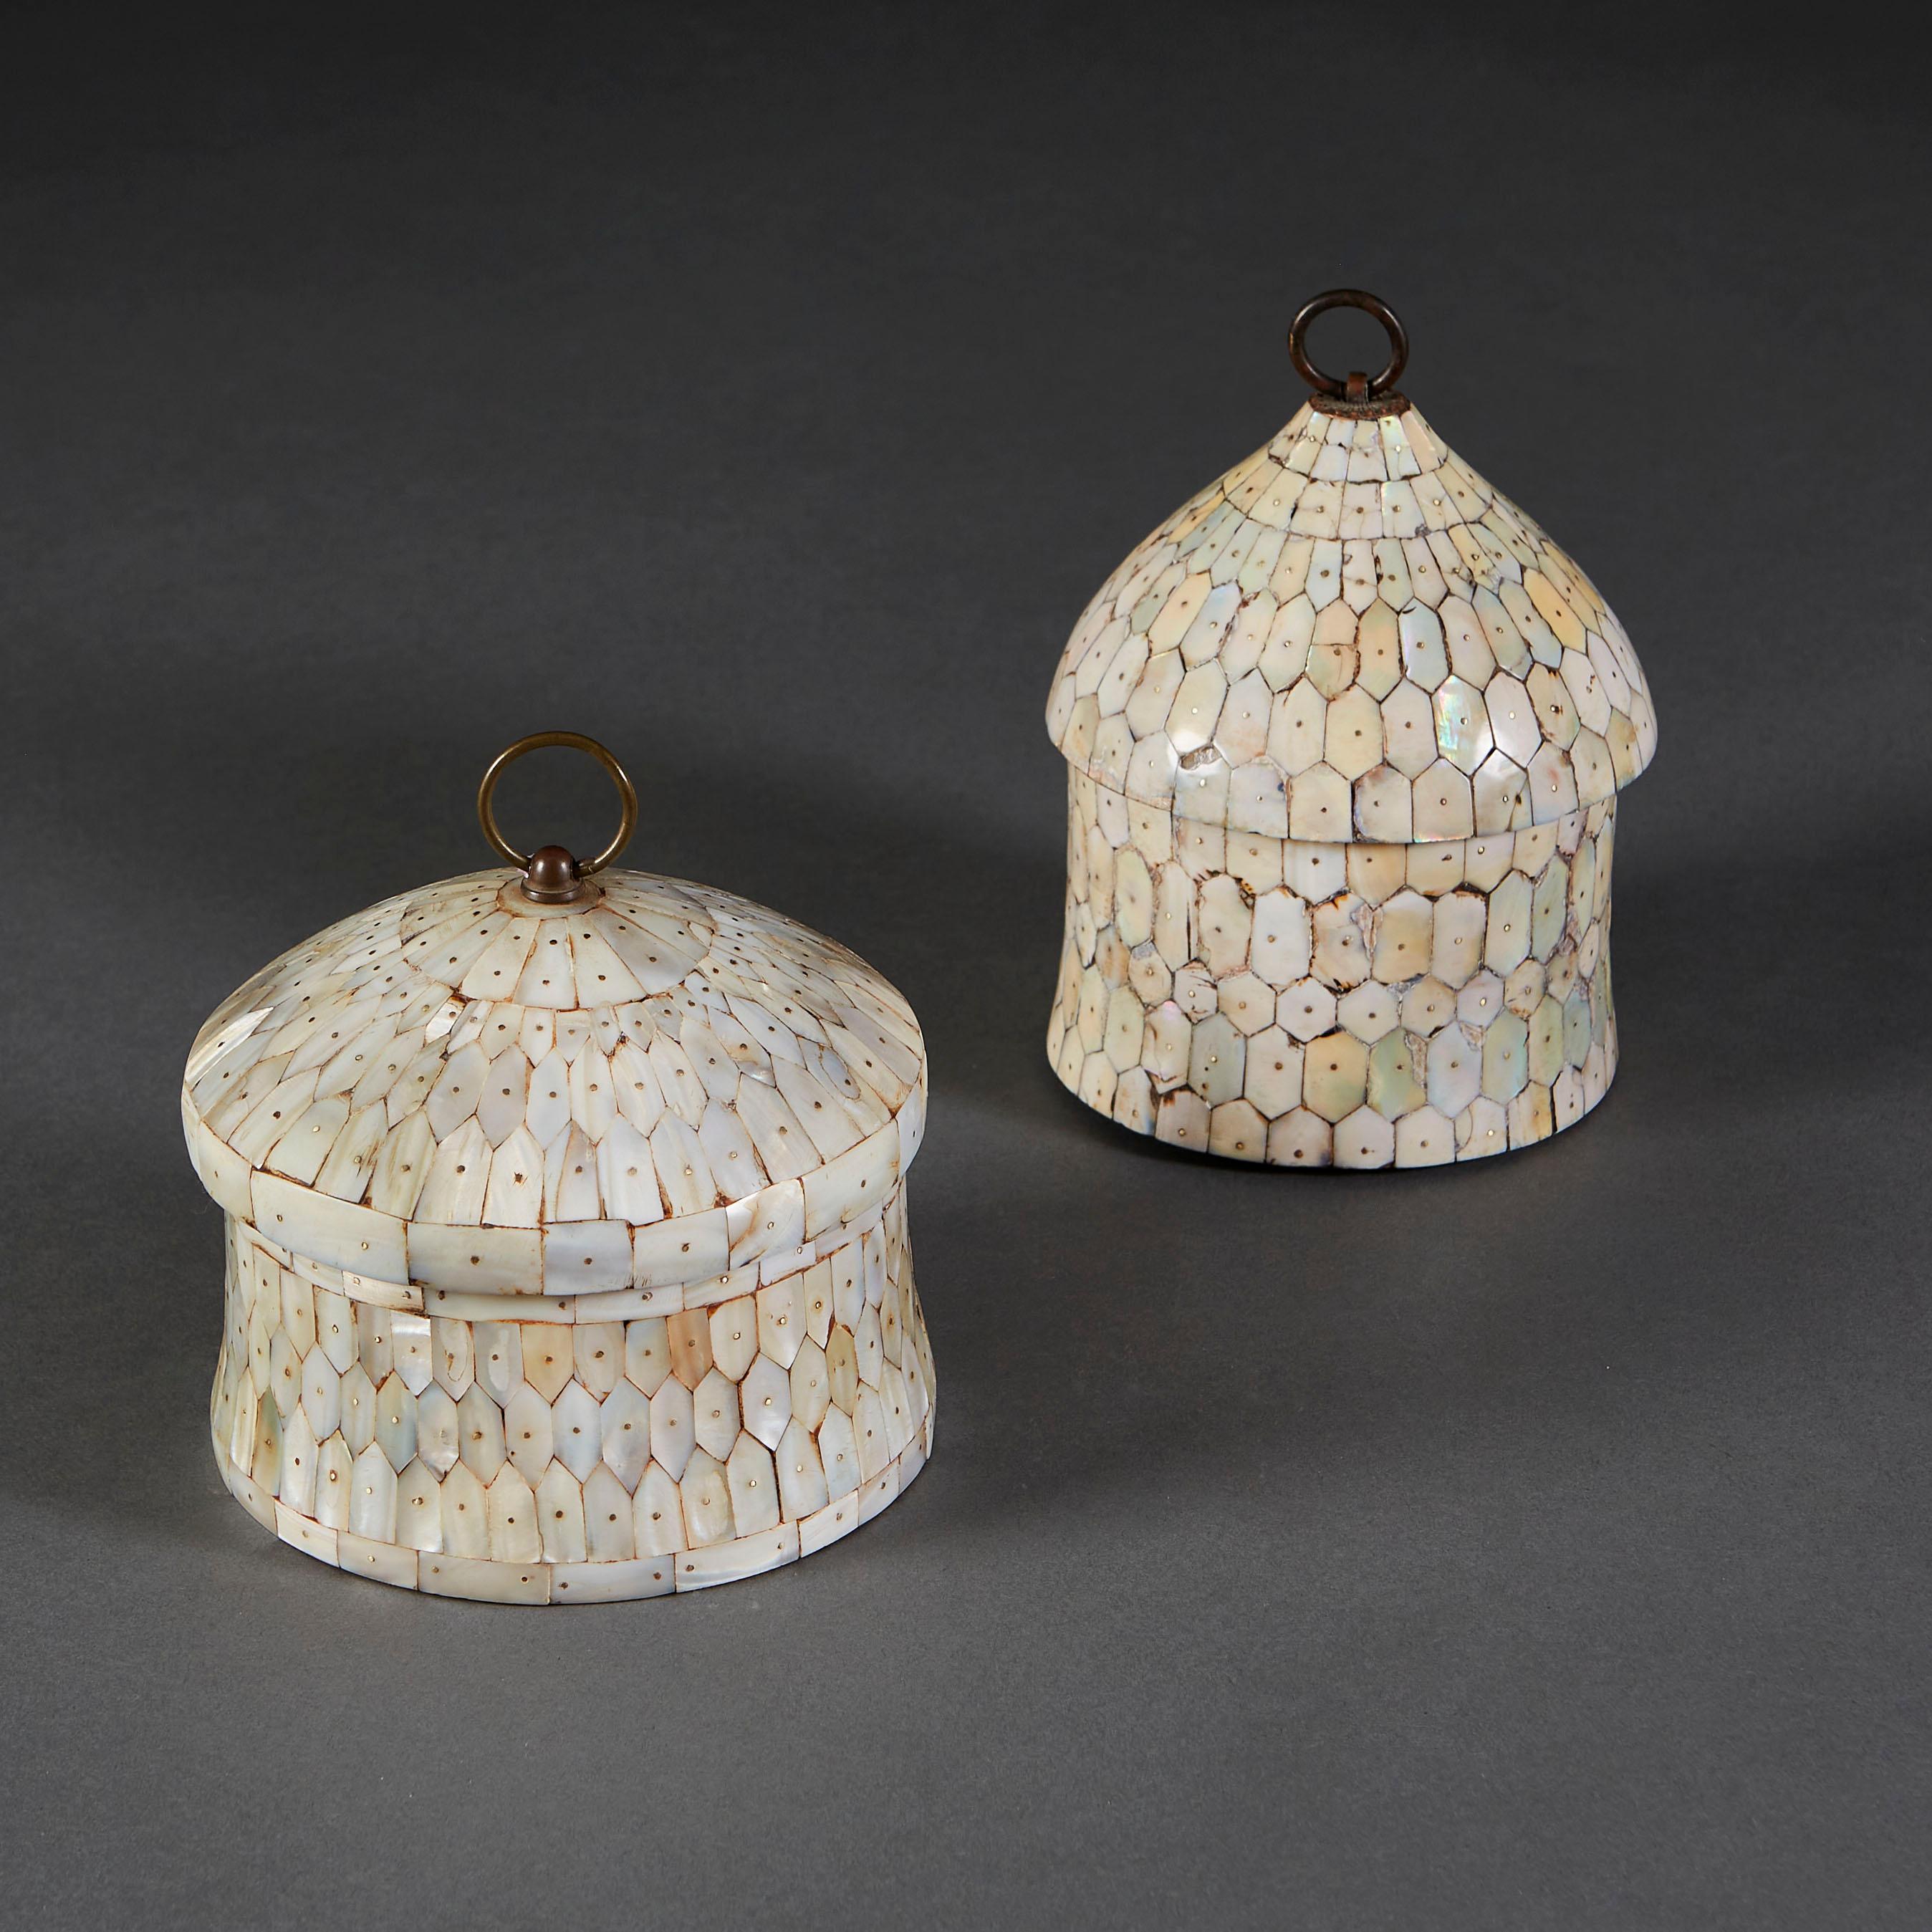 Two unusual domed boxes in late seventeenth century style, each inlaid in mother of pearl throughout, with bronze loop handle to the lid.

Please note: Boxes are of varying size. See dimensions below:

Height 17.00cm
Diameter 13.00cm

Height